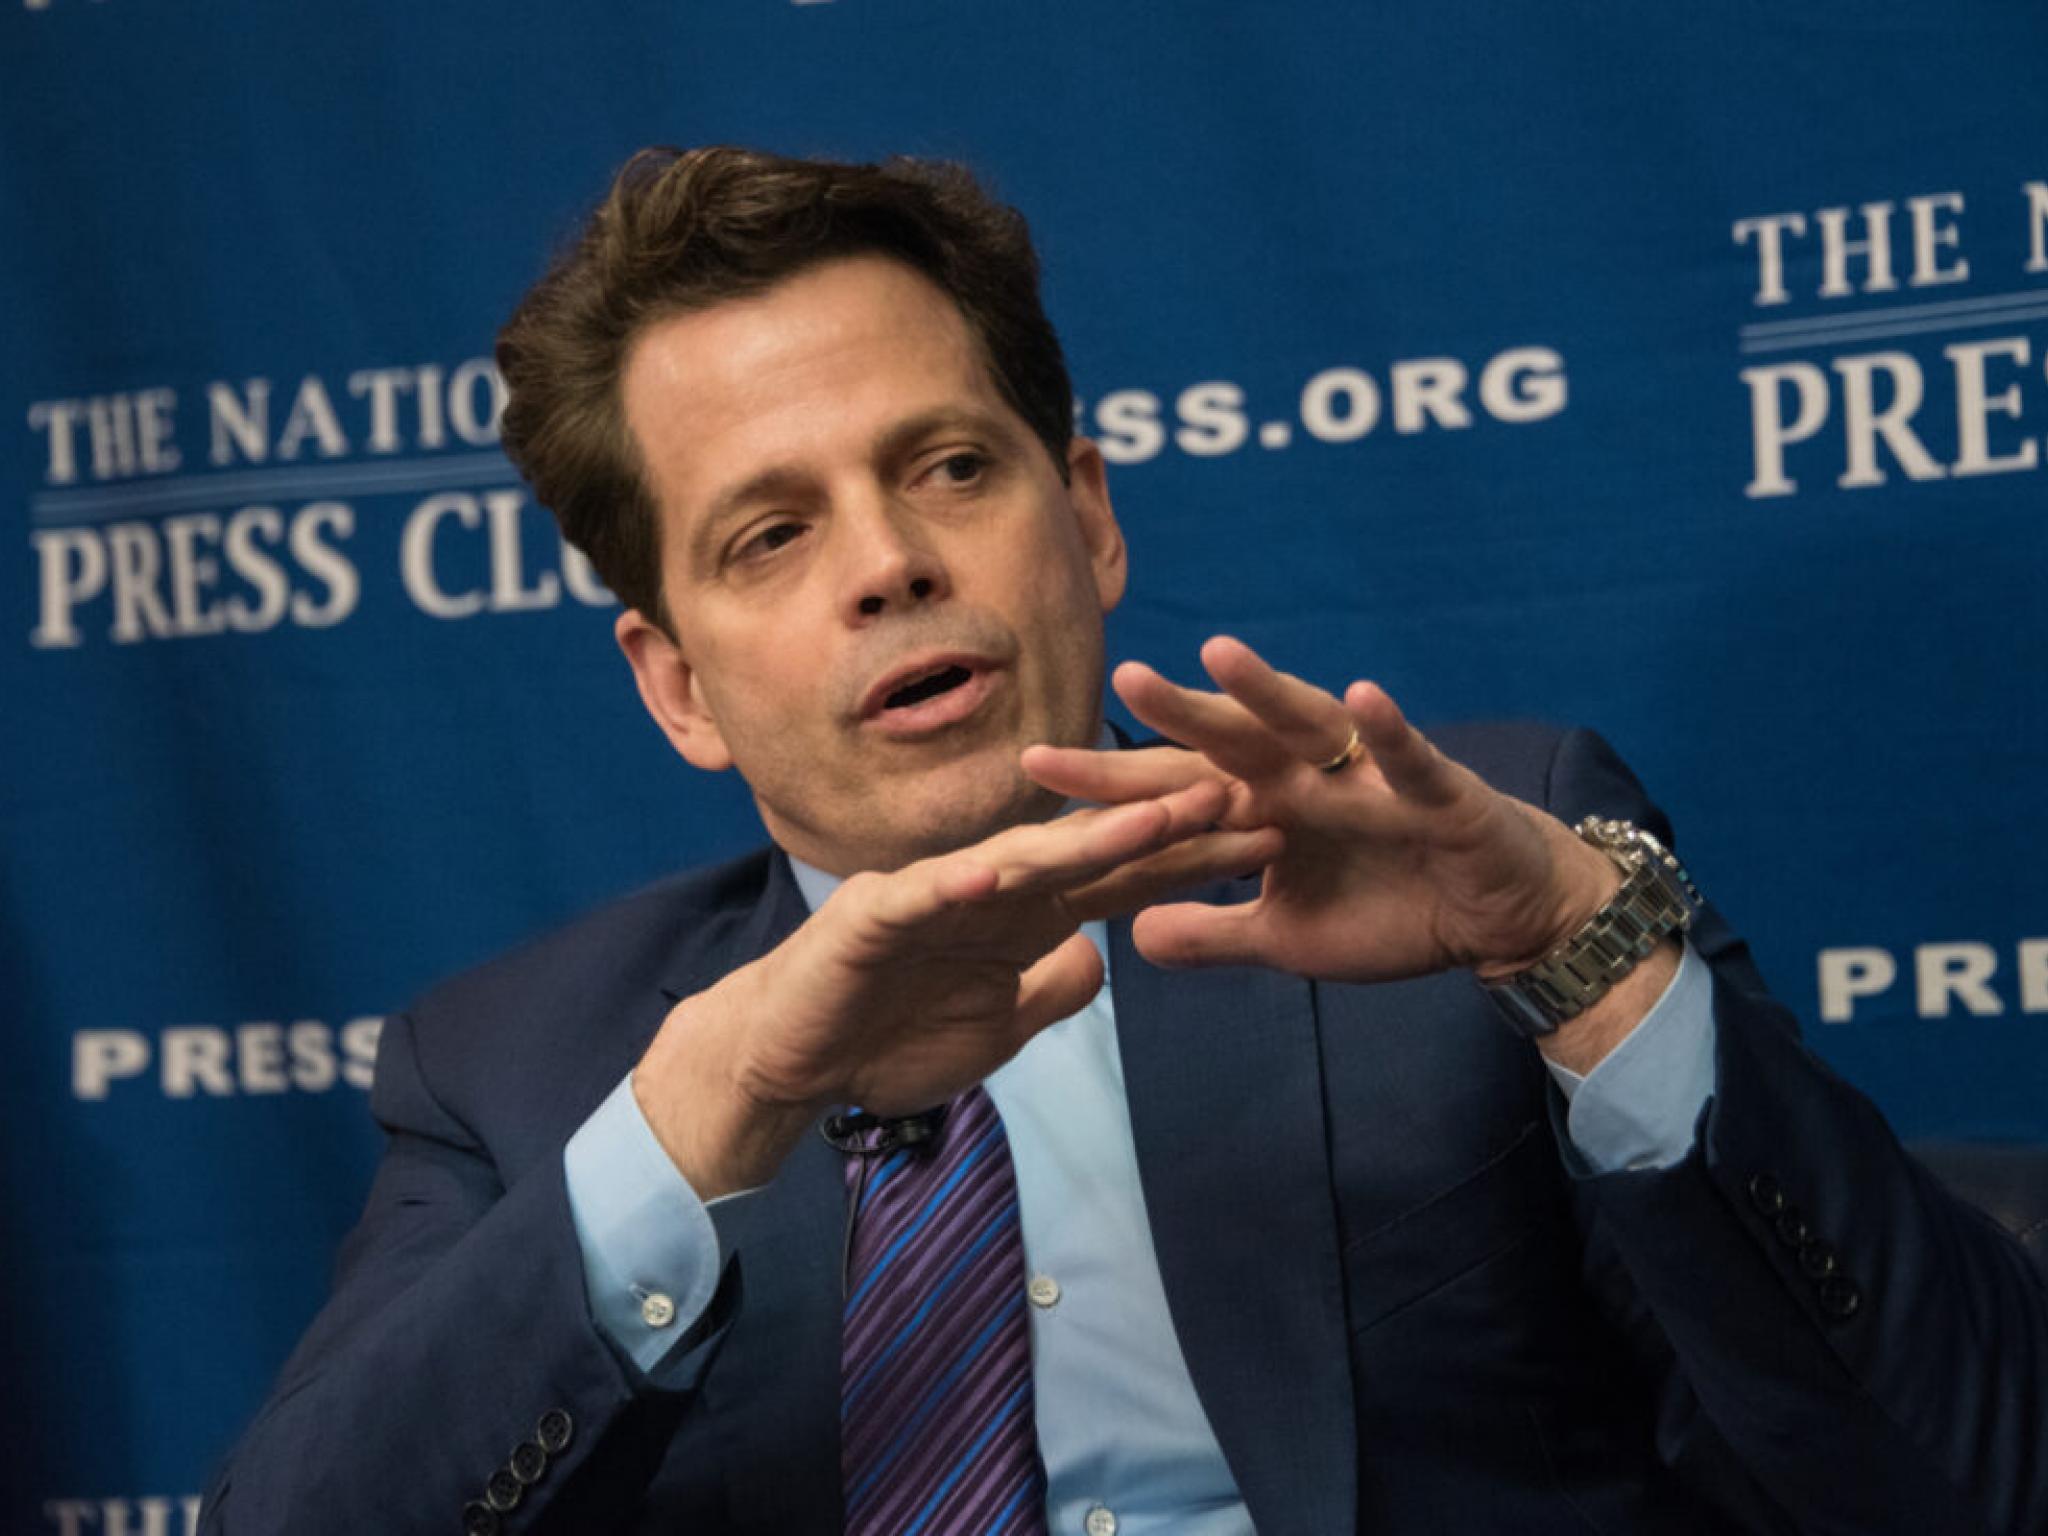  scaramucci-labels-meme-stock-mania-led-by-gme-amc-as-french-revolution-of-finance-but-warns-sober-rational-investors-to-be-super-careful 